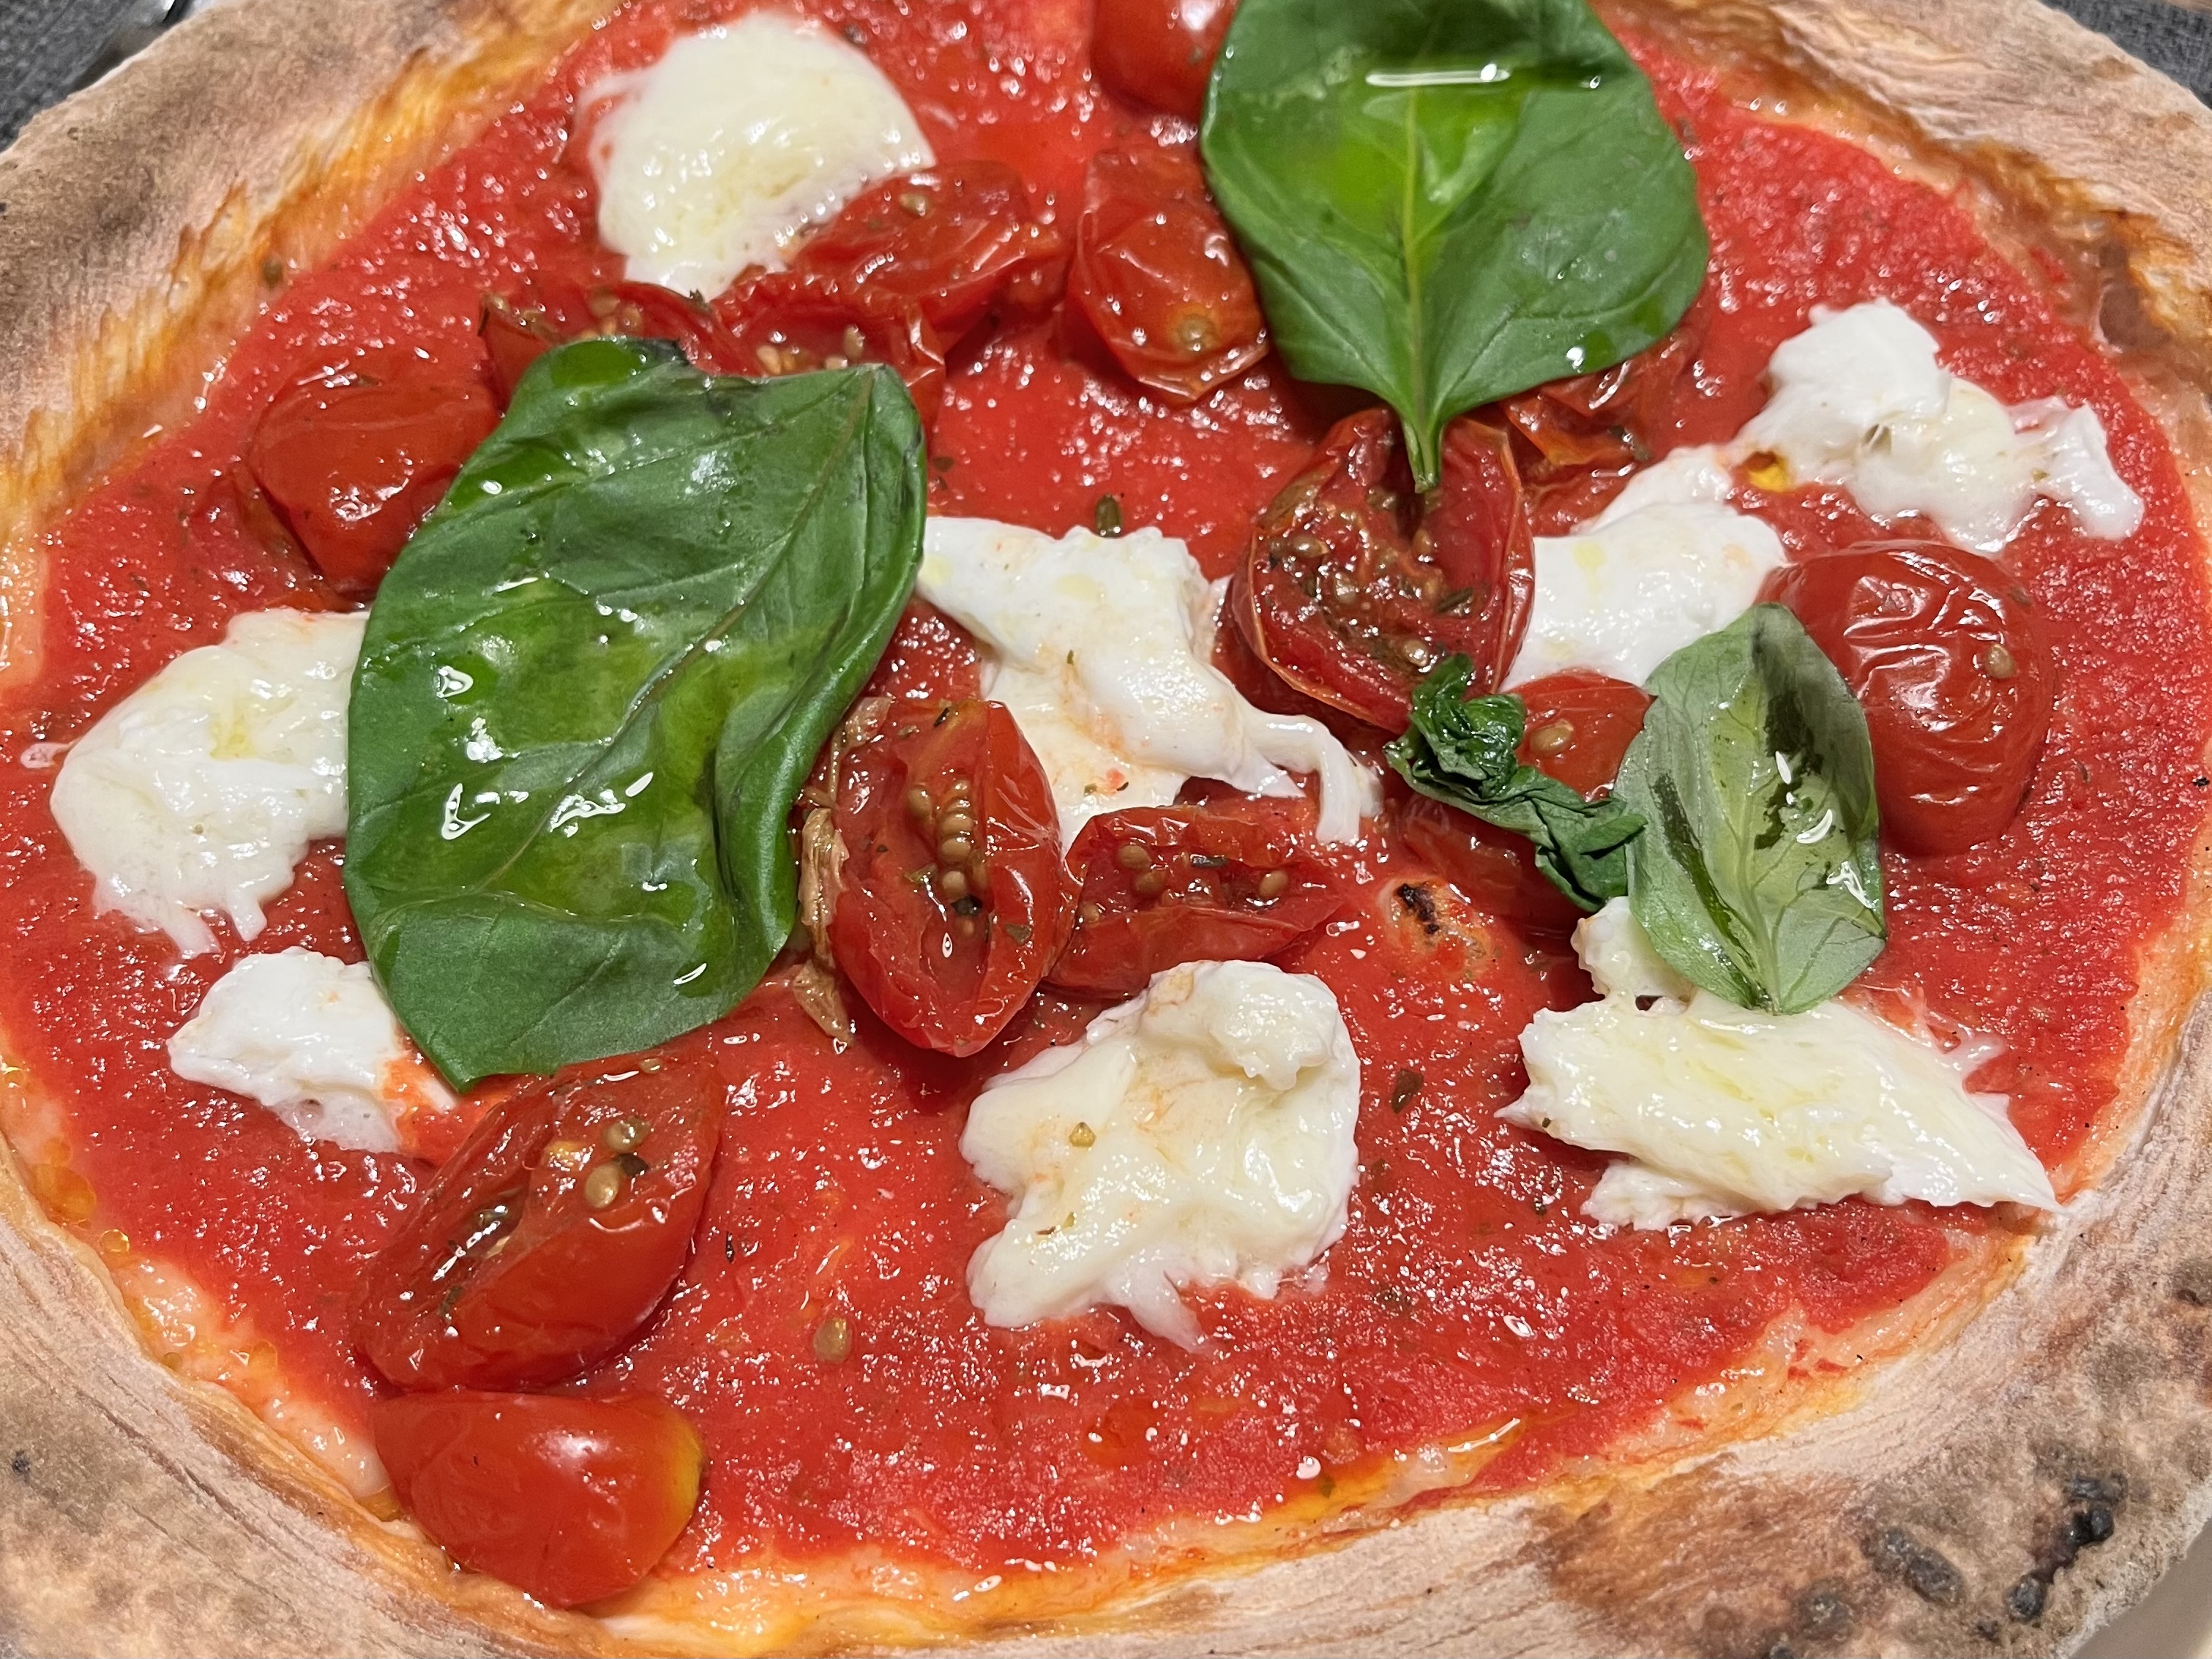 A close-up of a pizza with tomato sauce, cherry tomatoes, basil, and buffalo mozzarella.